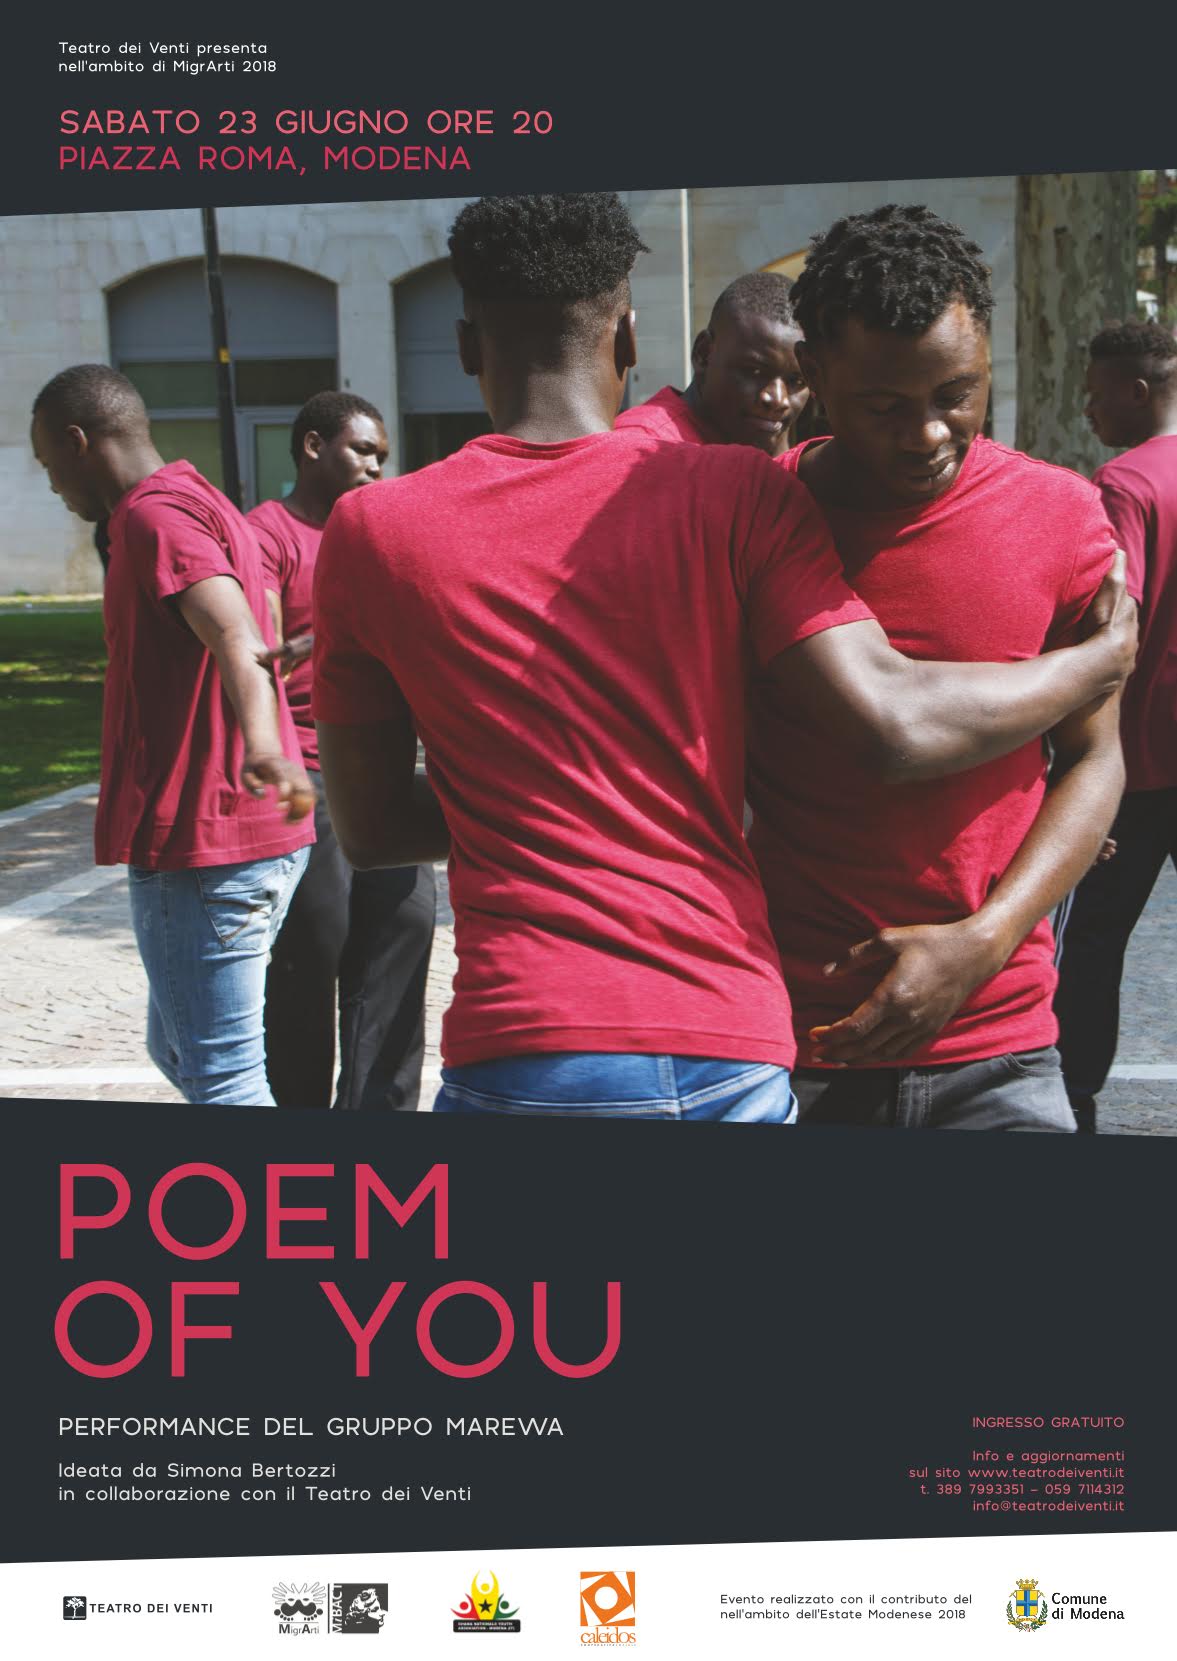 Poem of you